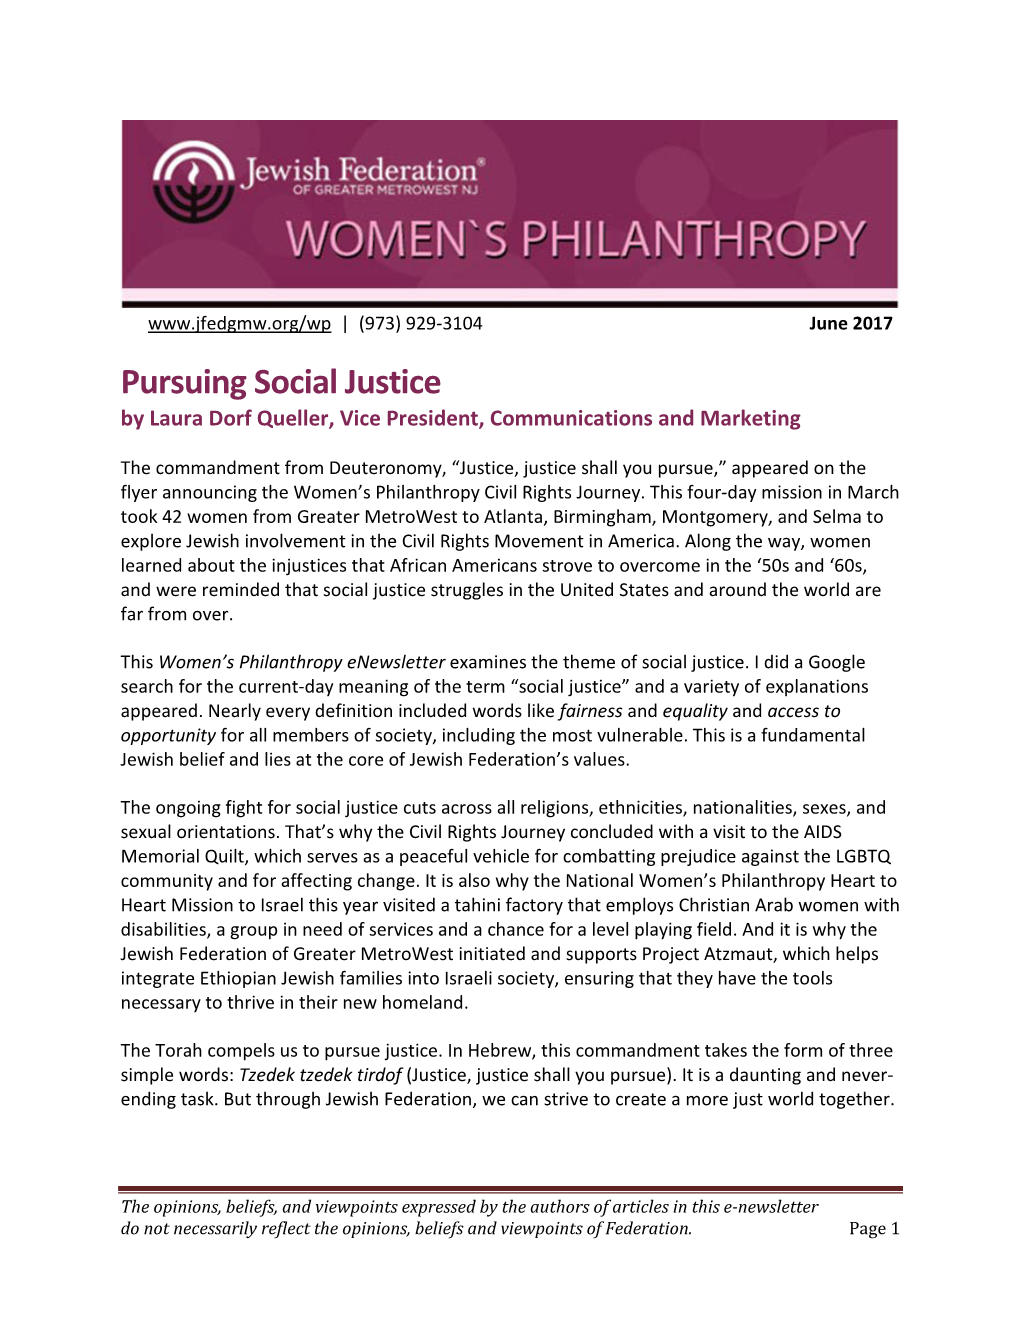 Pursuing Social Justice by Laura Dorf Queller, Vice President, Communications and Marketing